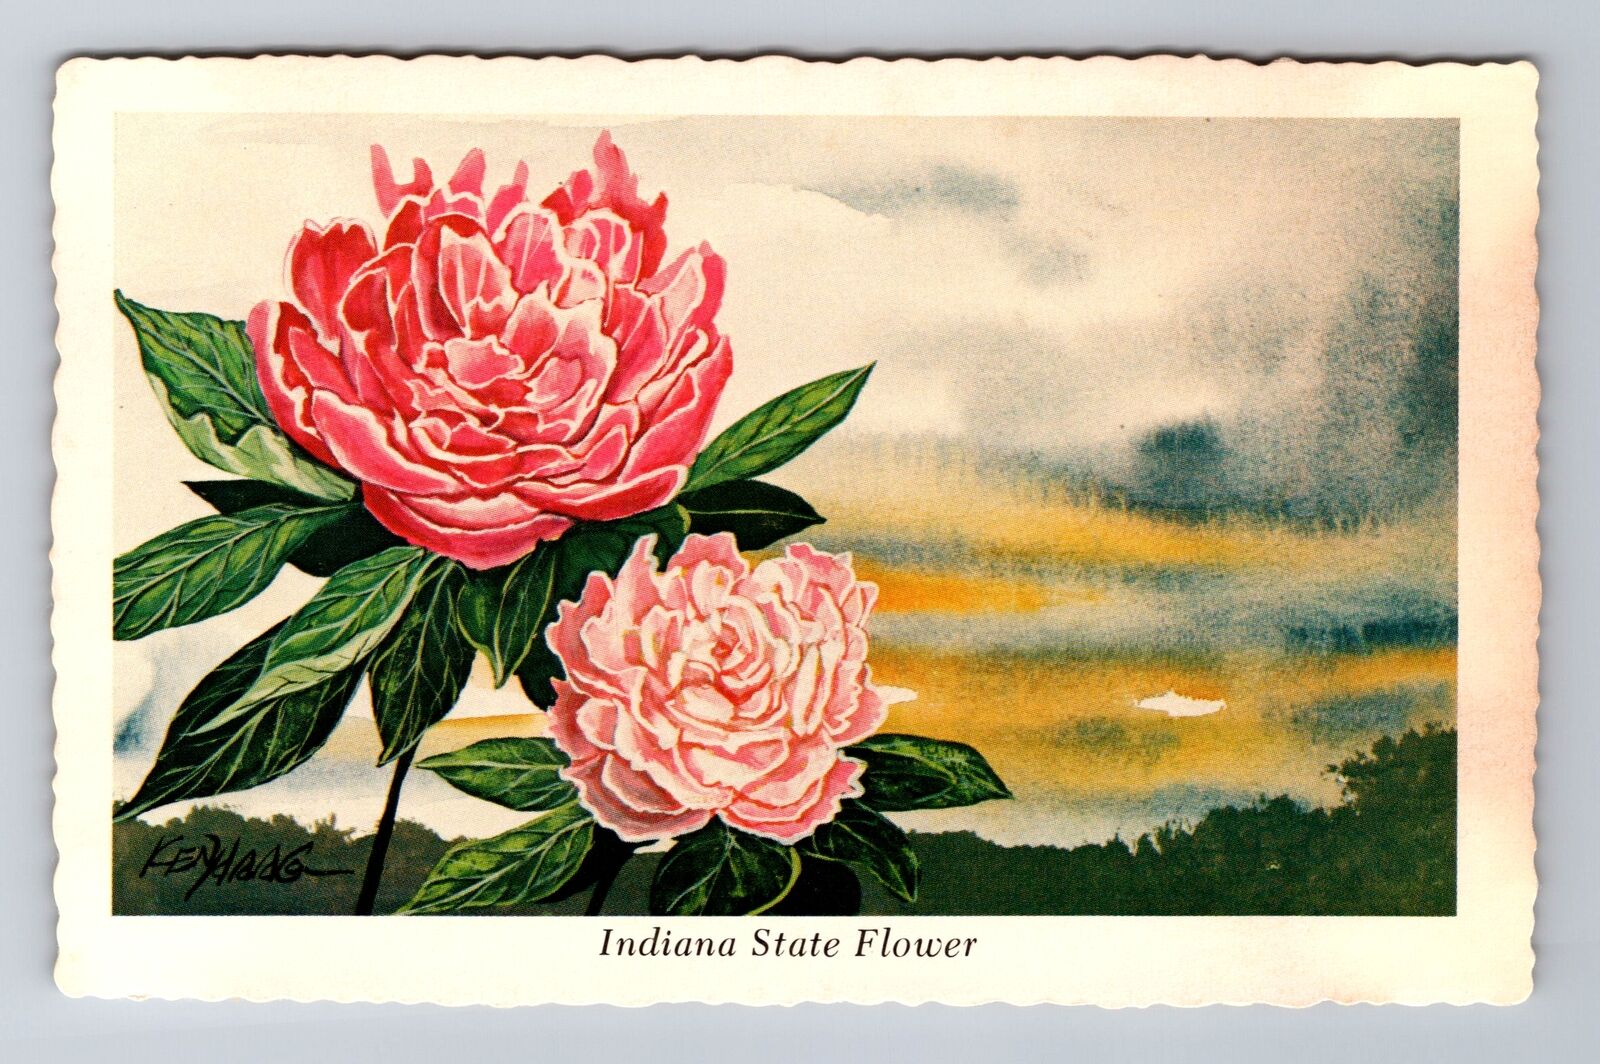 IN-Indiana, Indiana State Flower, the Peony, Greetings Souvenir Vintage Postcard